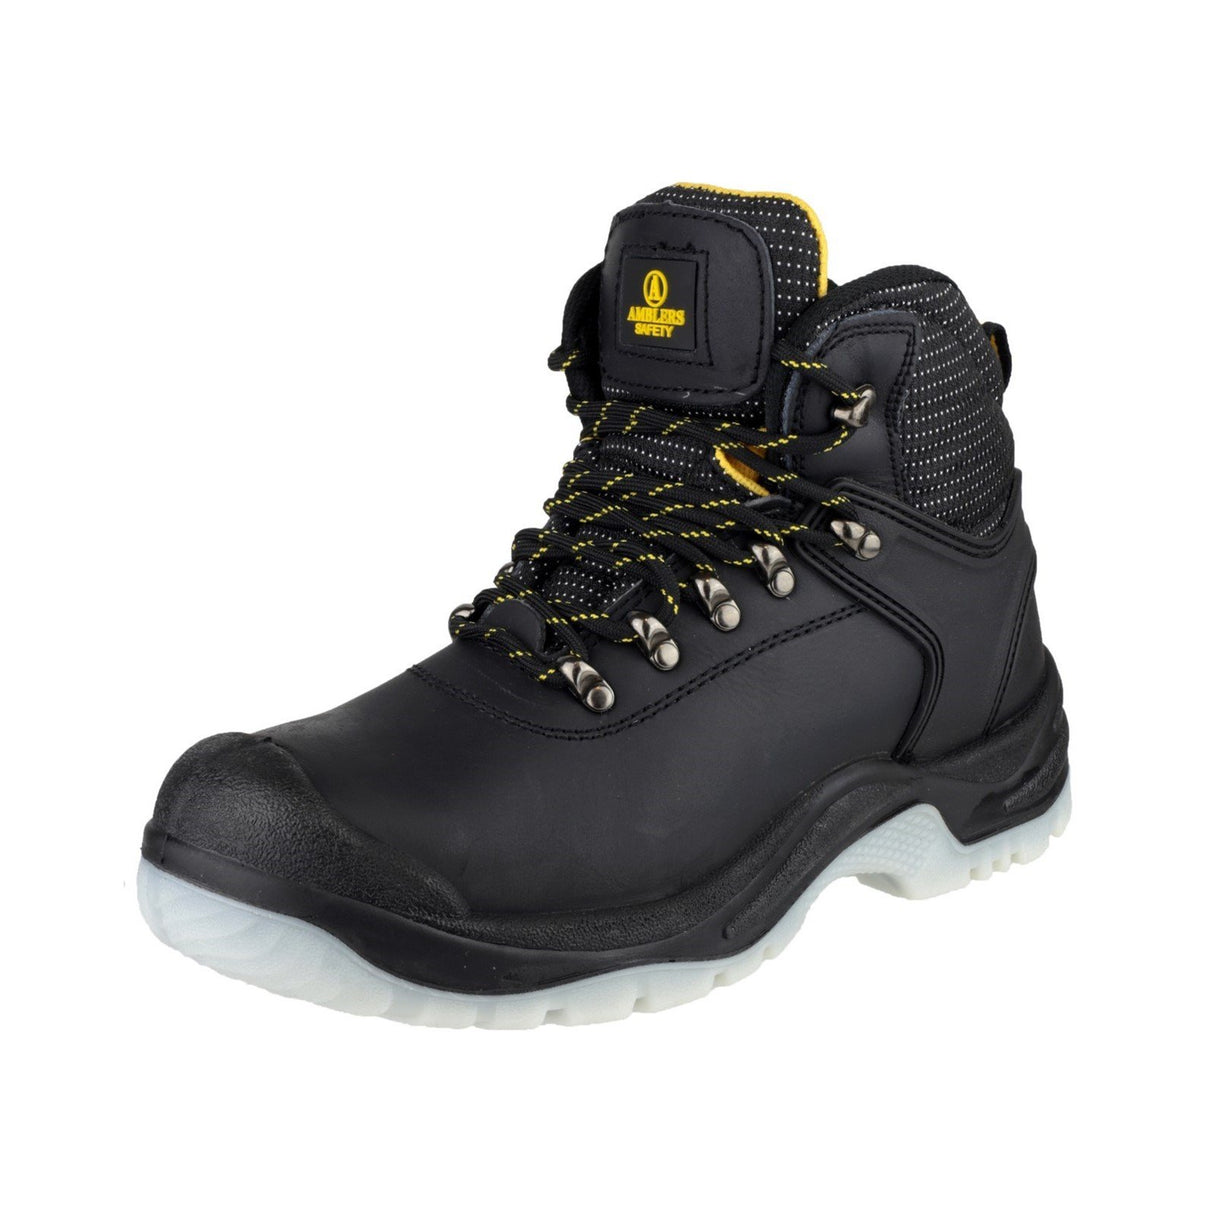 Amblers Safety Antistatic Lace Up Hiker Safety Boots